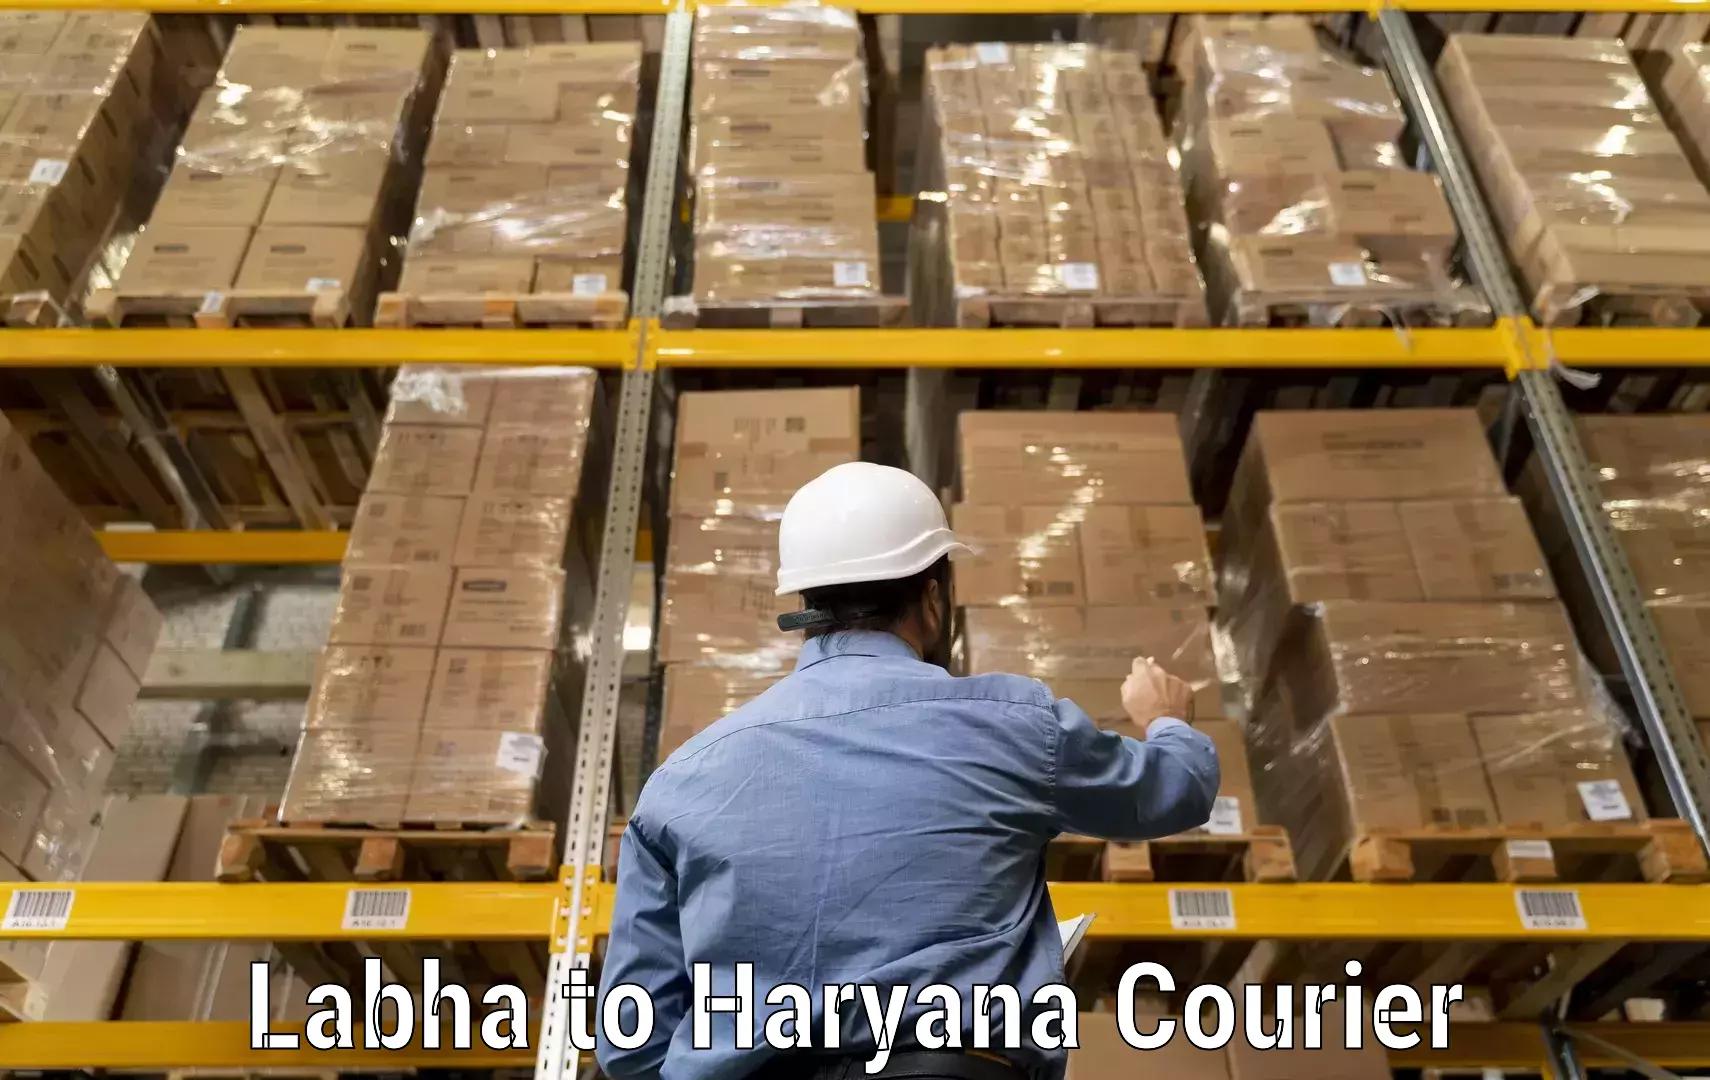 Next-generation courier services Labha to NCR Haryana